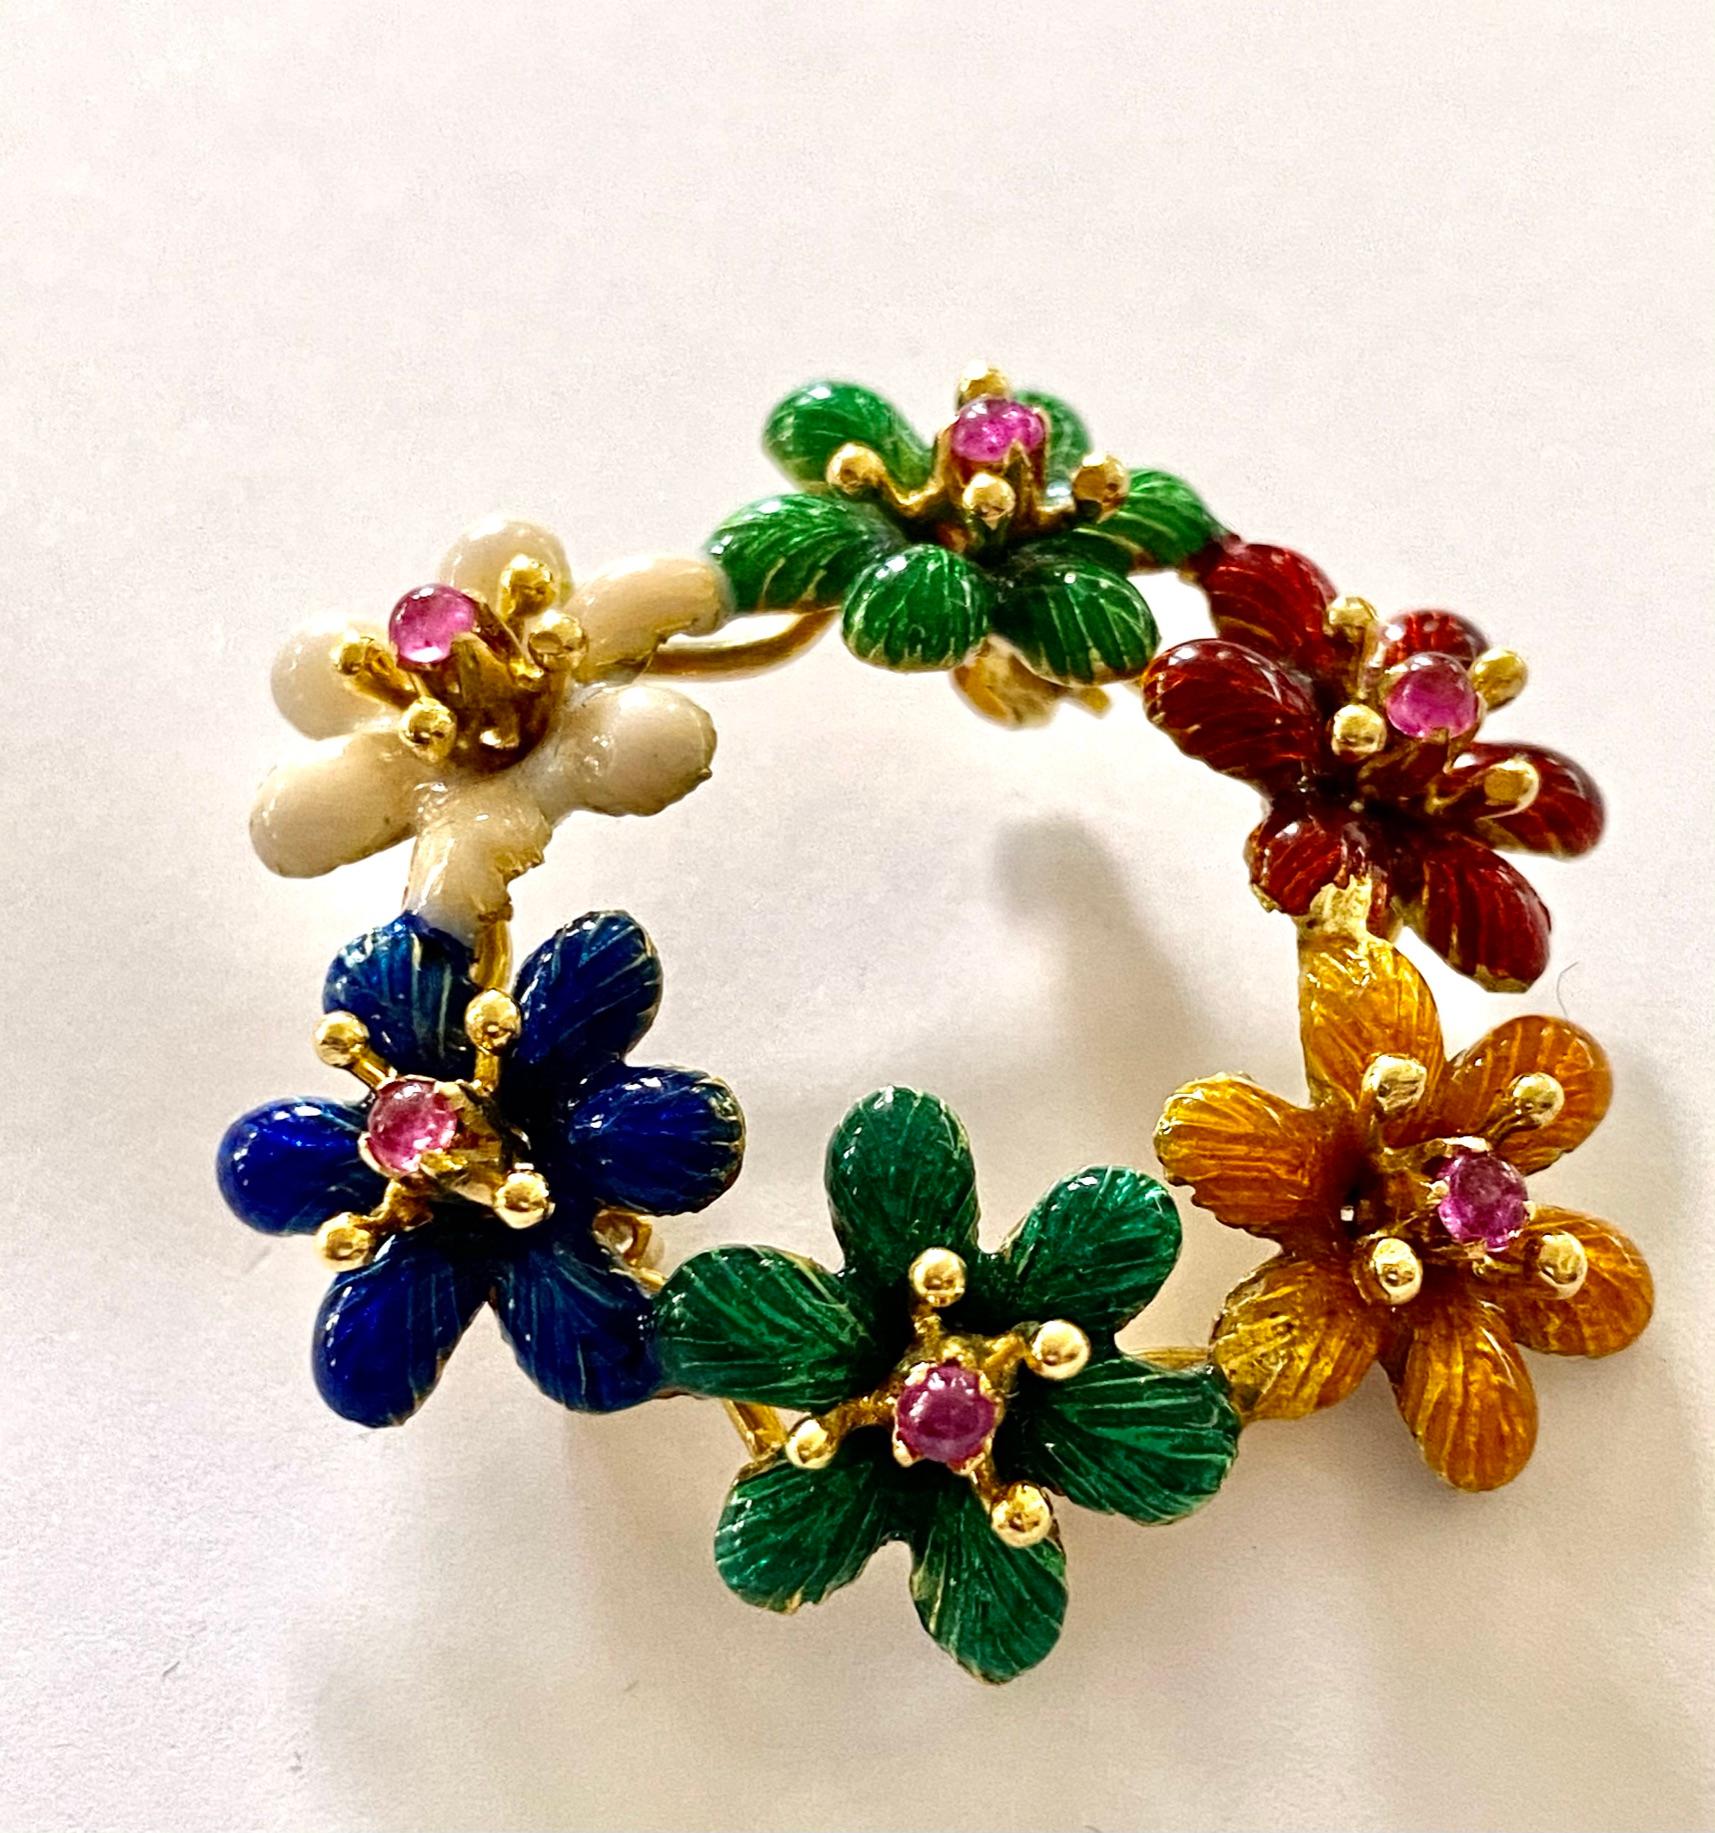 Cabochon Enemal Flower Brooch, Set with Nataural Pink Sapphires, Italy, 1950